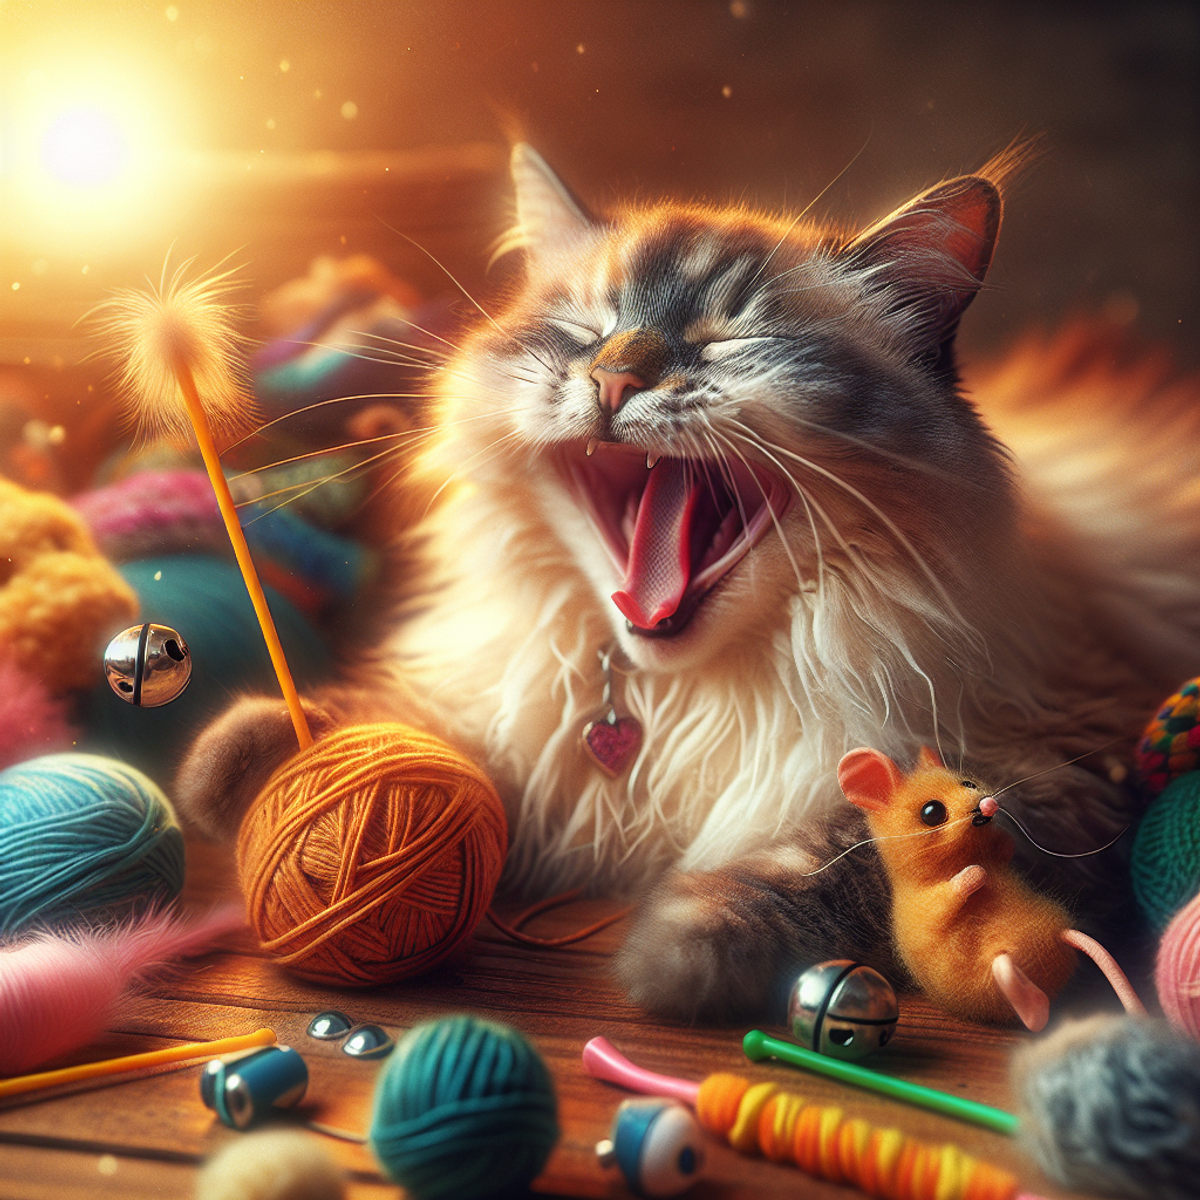 An elderly cat playing with a ball of yarn, a feathery wand tease stick, and a bell-filled mouse.